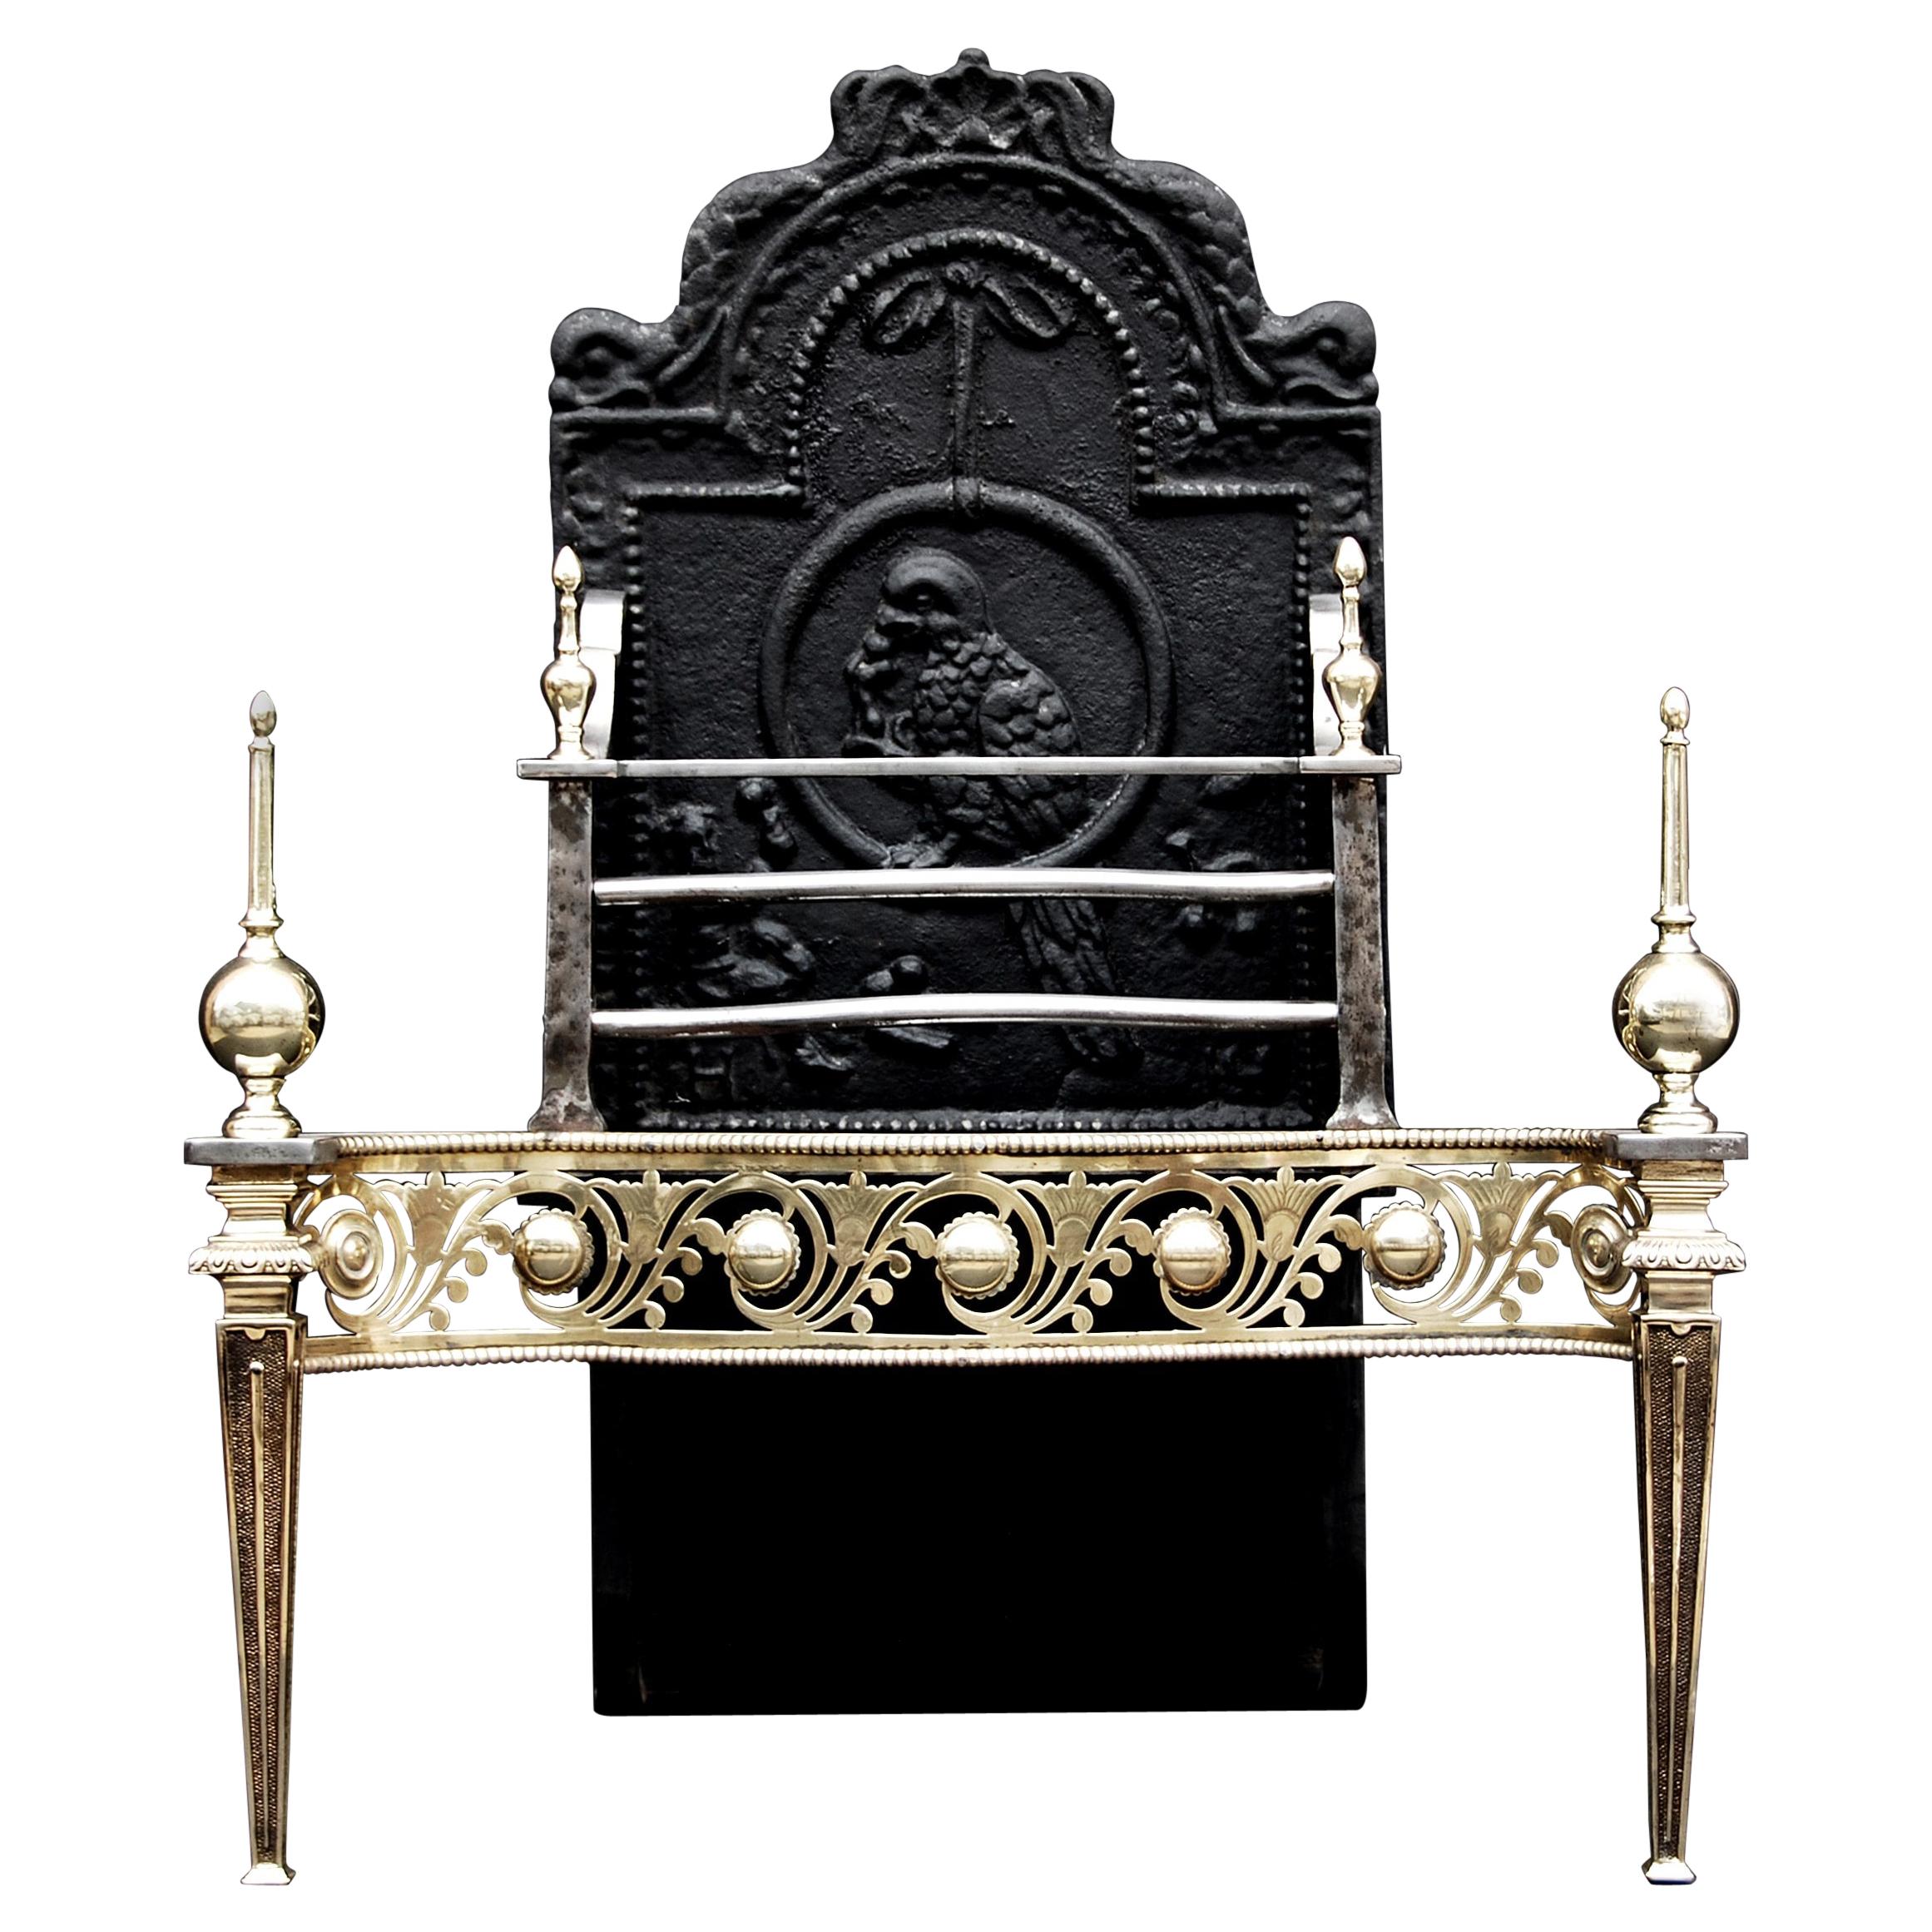 Fine Quality English Brass & Steel Firegrate with Ornate Fret For Sale